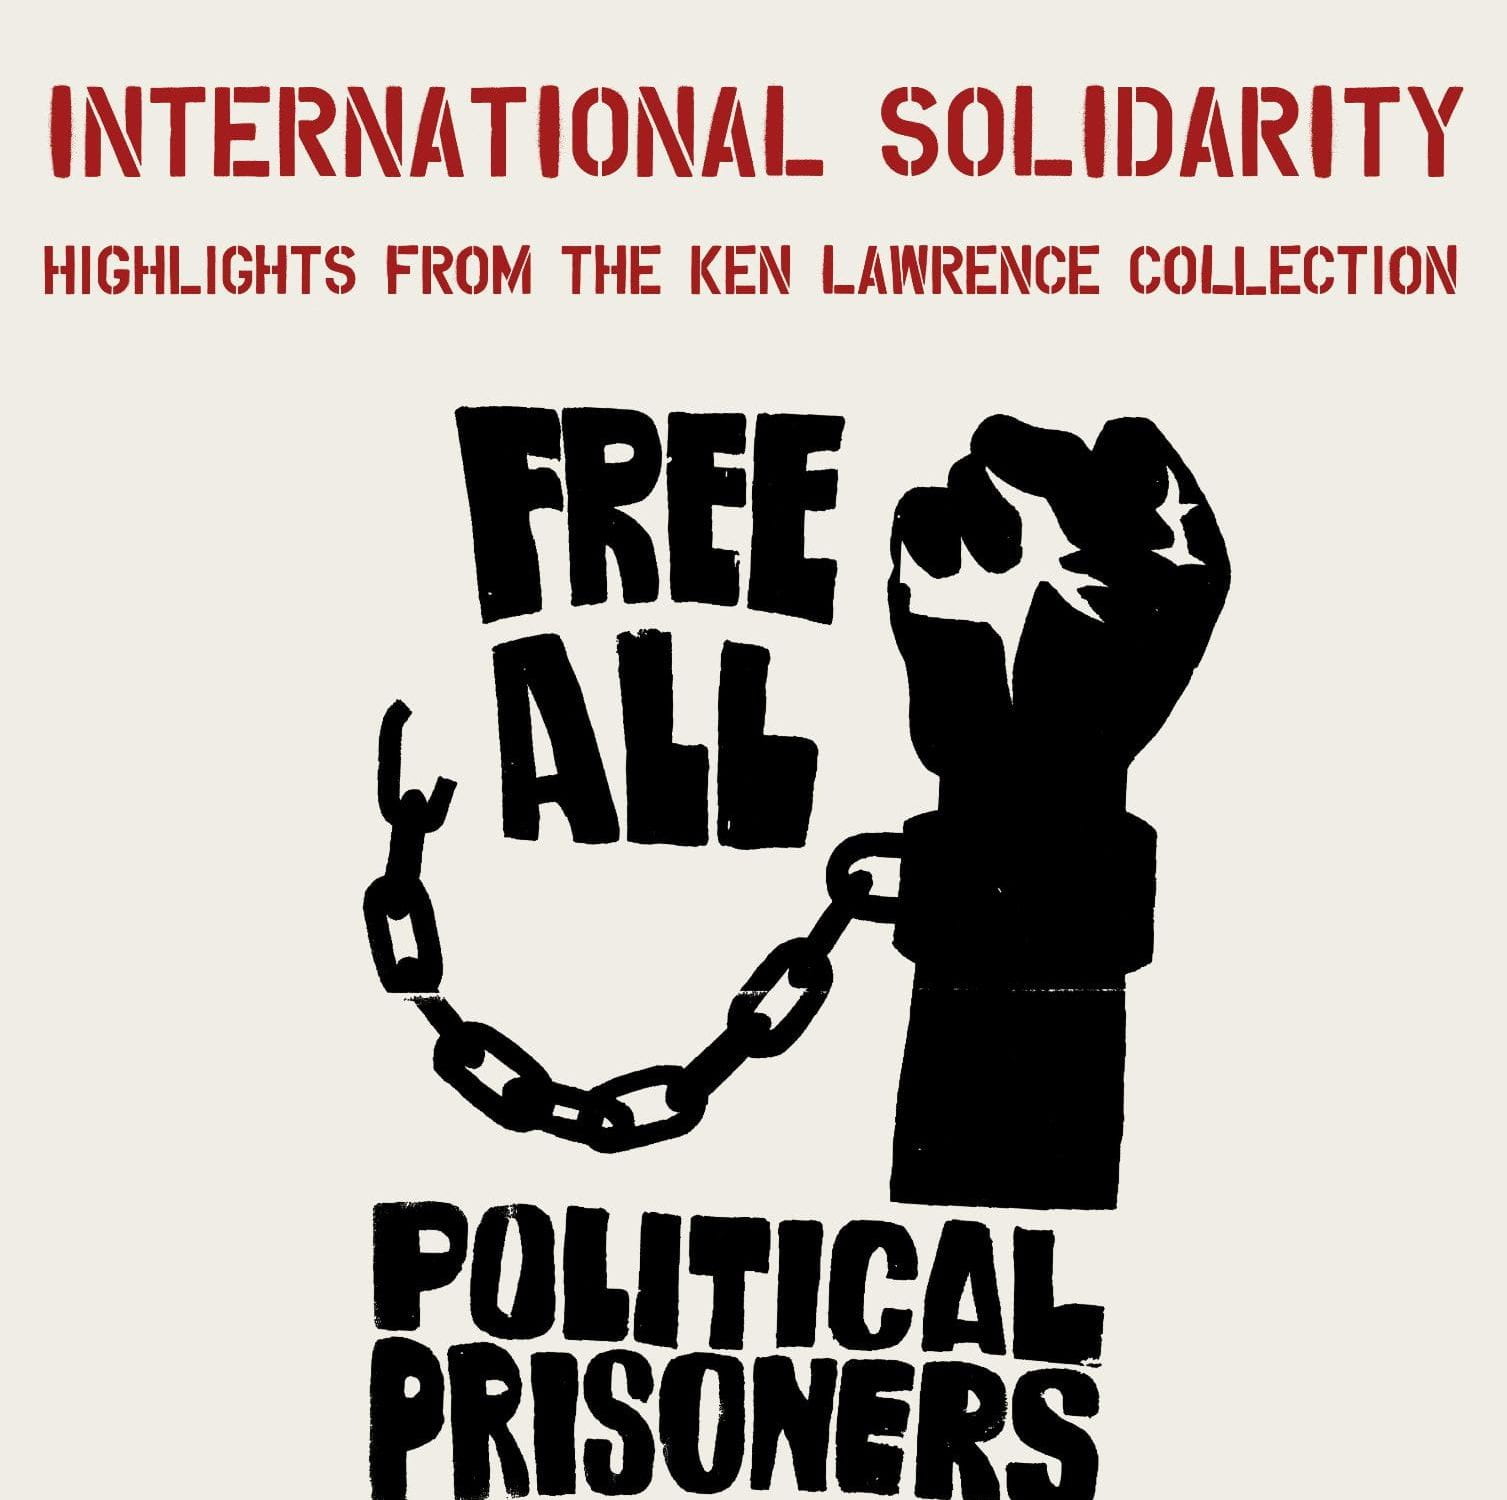 poster - international solidarity - "free all political prisoners"